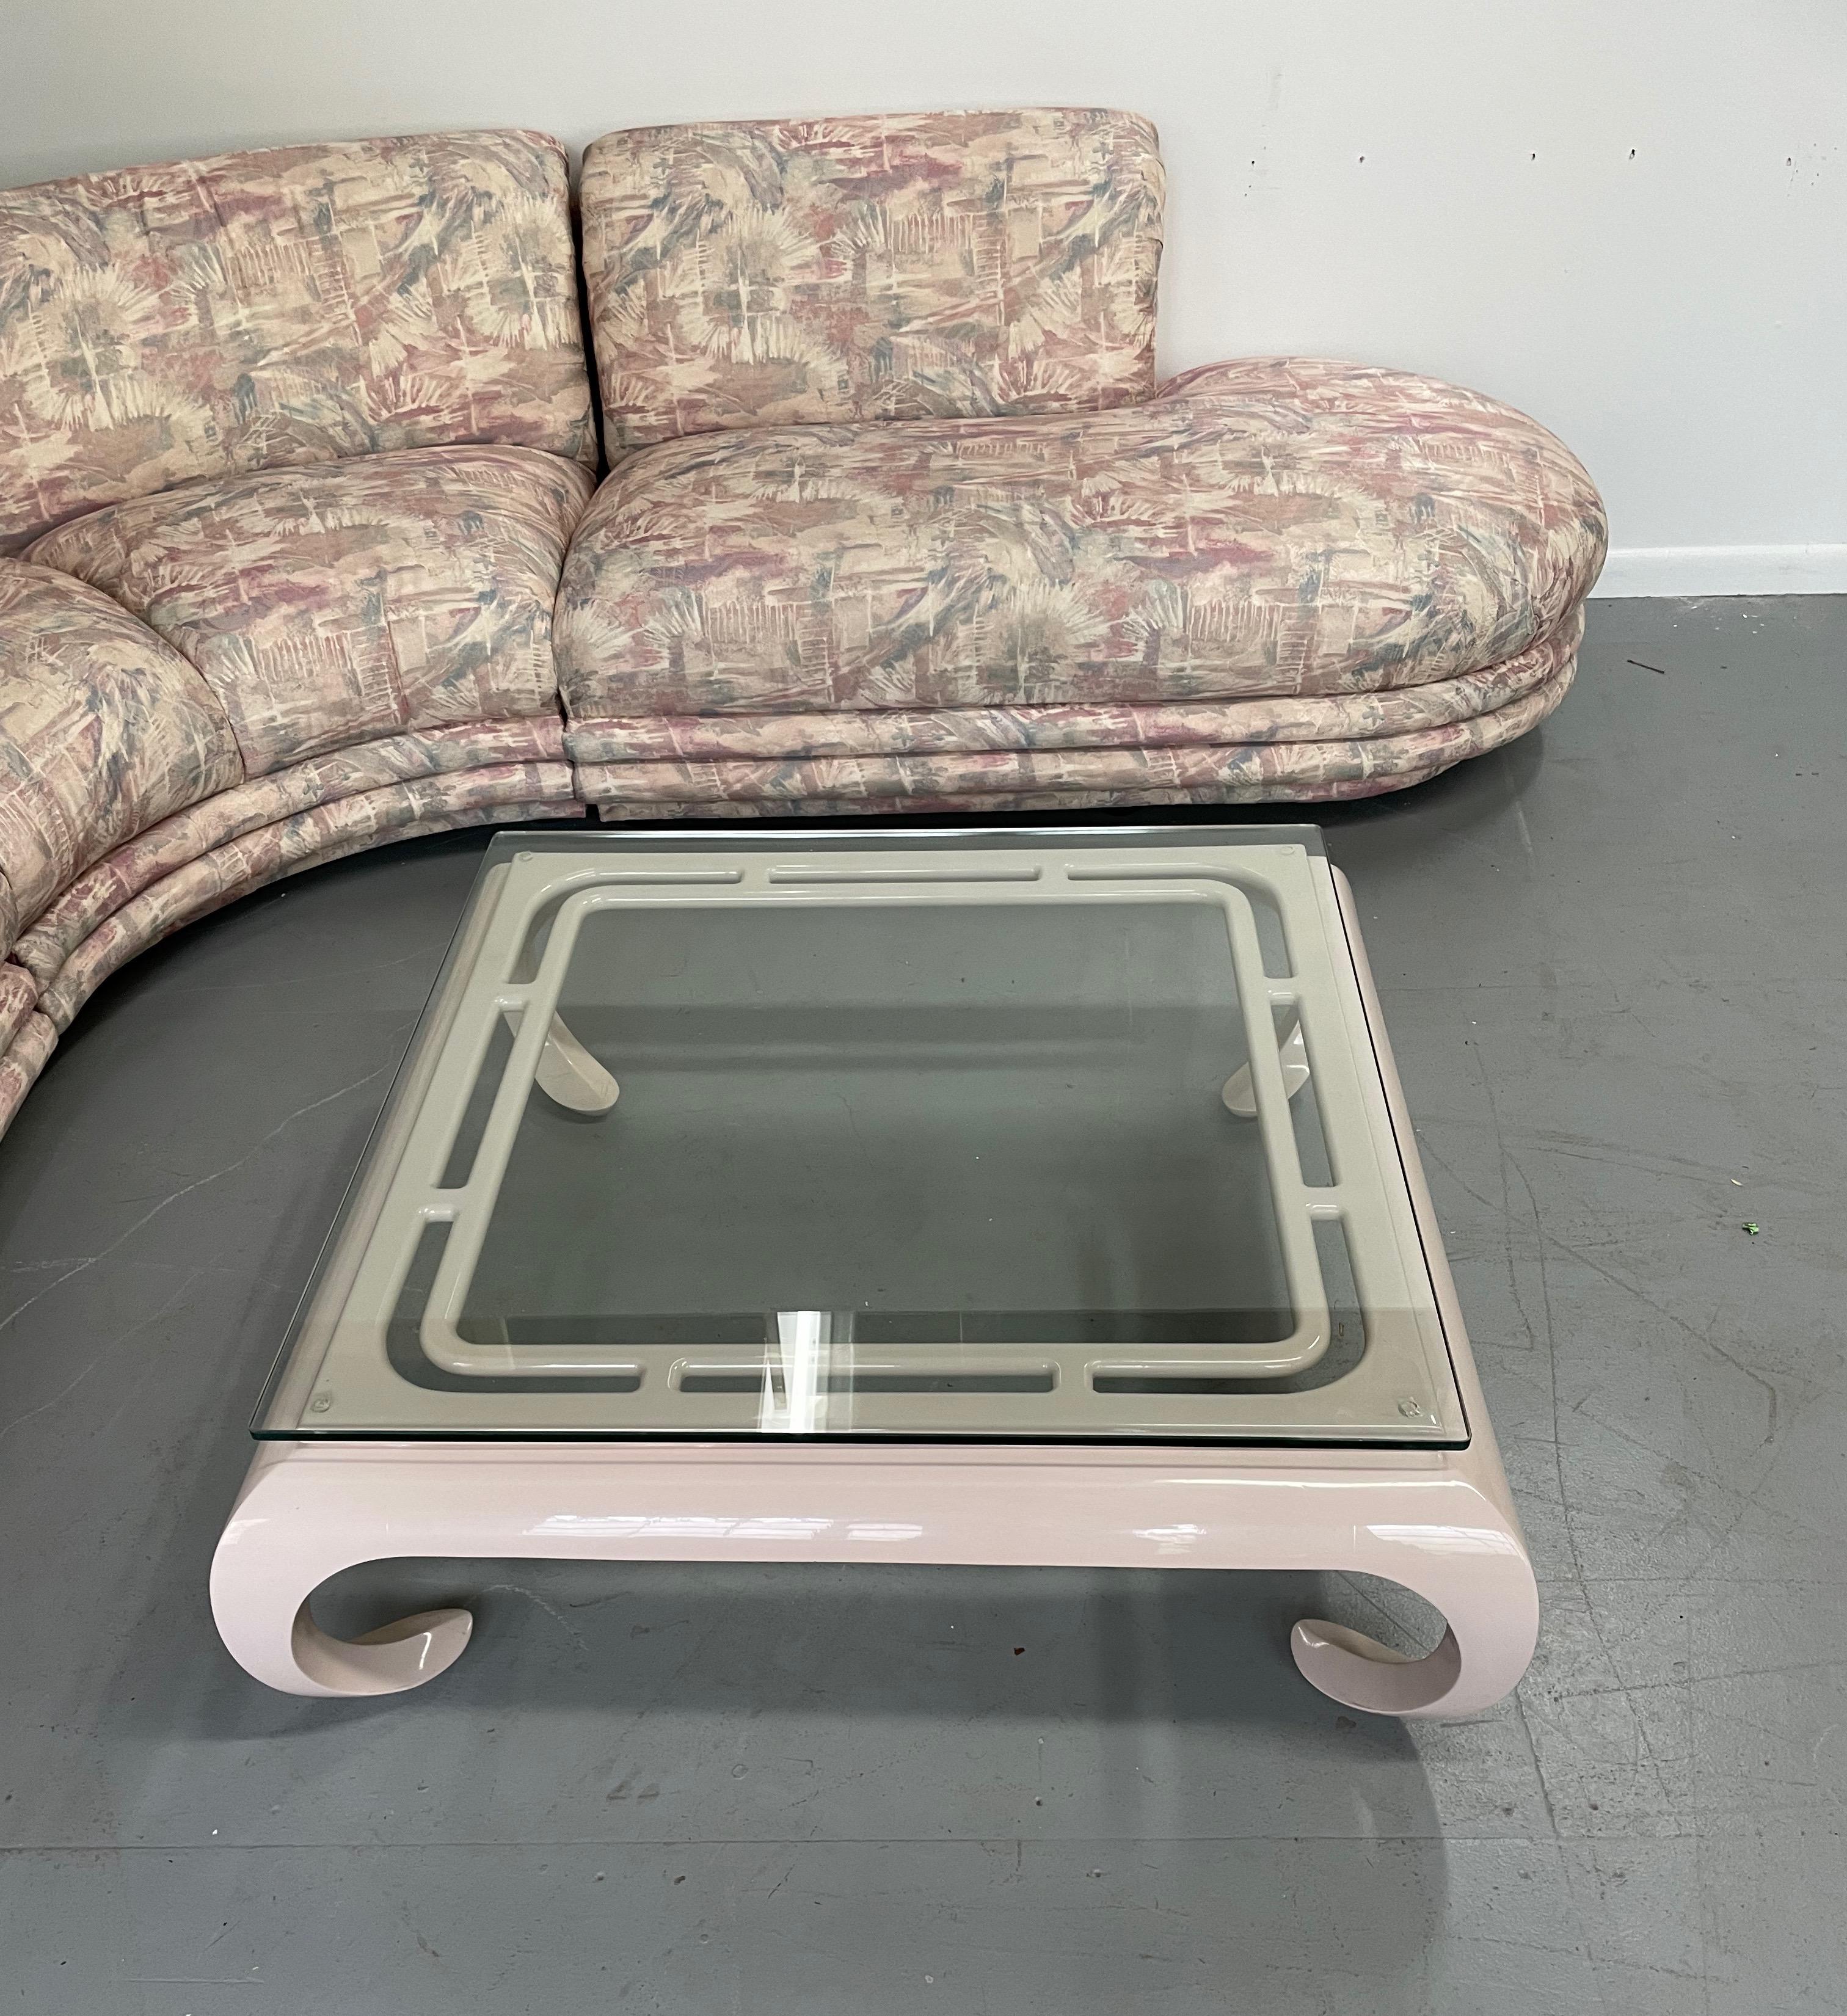 Hollywood Regency Lacquered Asian Influenced Coffee Table in Dusty Rose For Sale 3